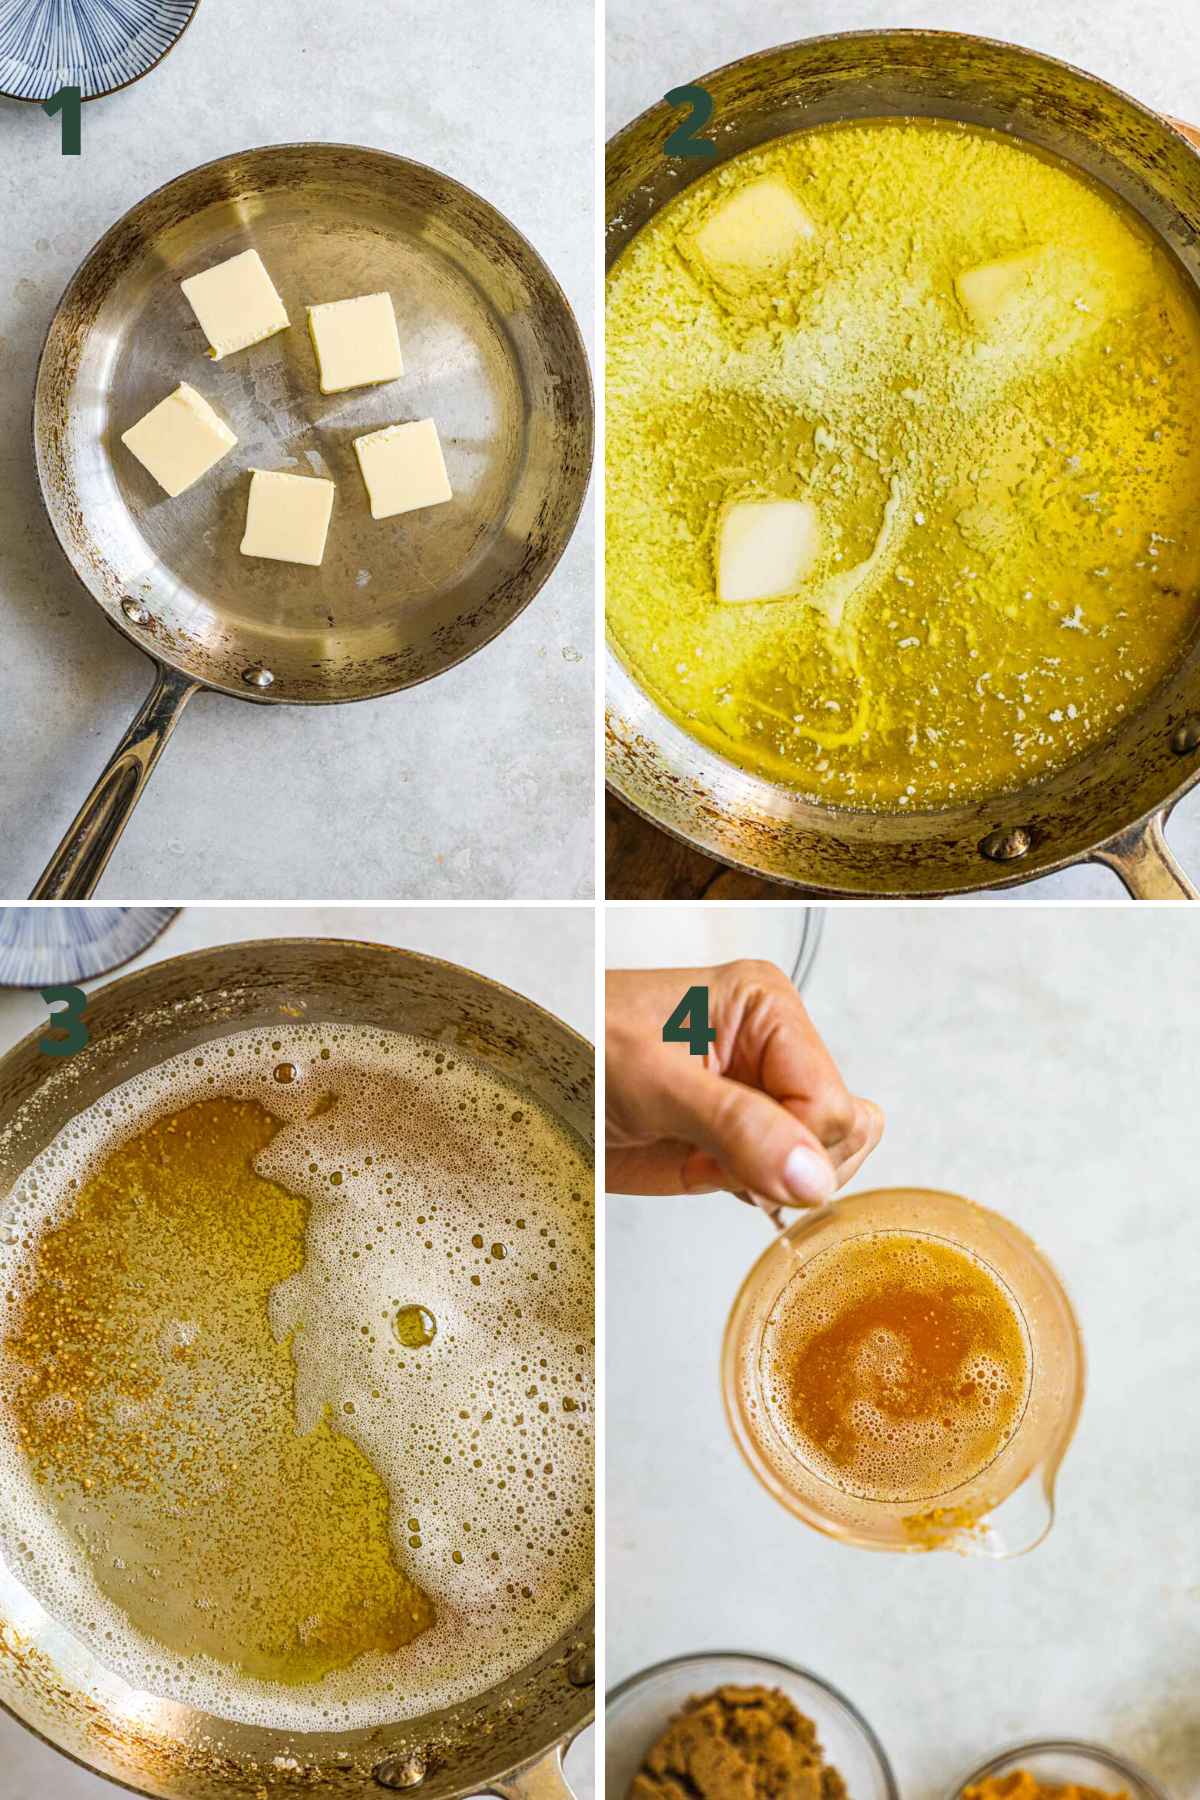 Steps to make brown butter, including melting the cubed butter in a skillet, then slowly browning the butter to toast the milk solids.